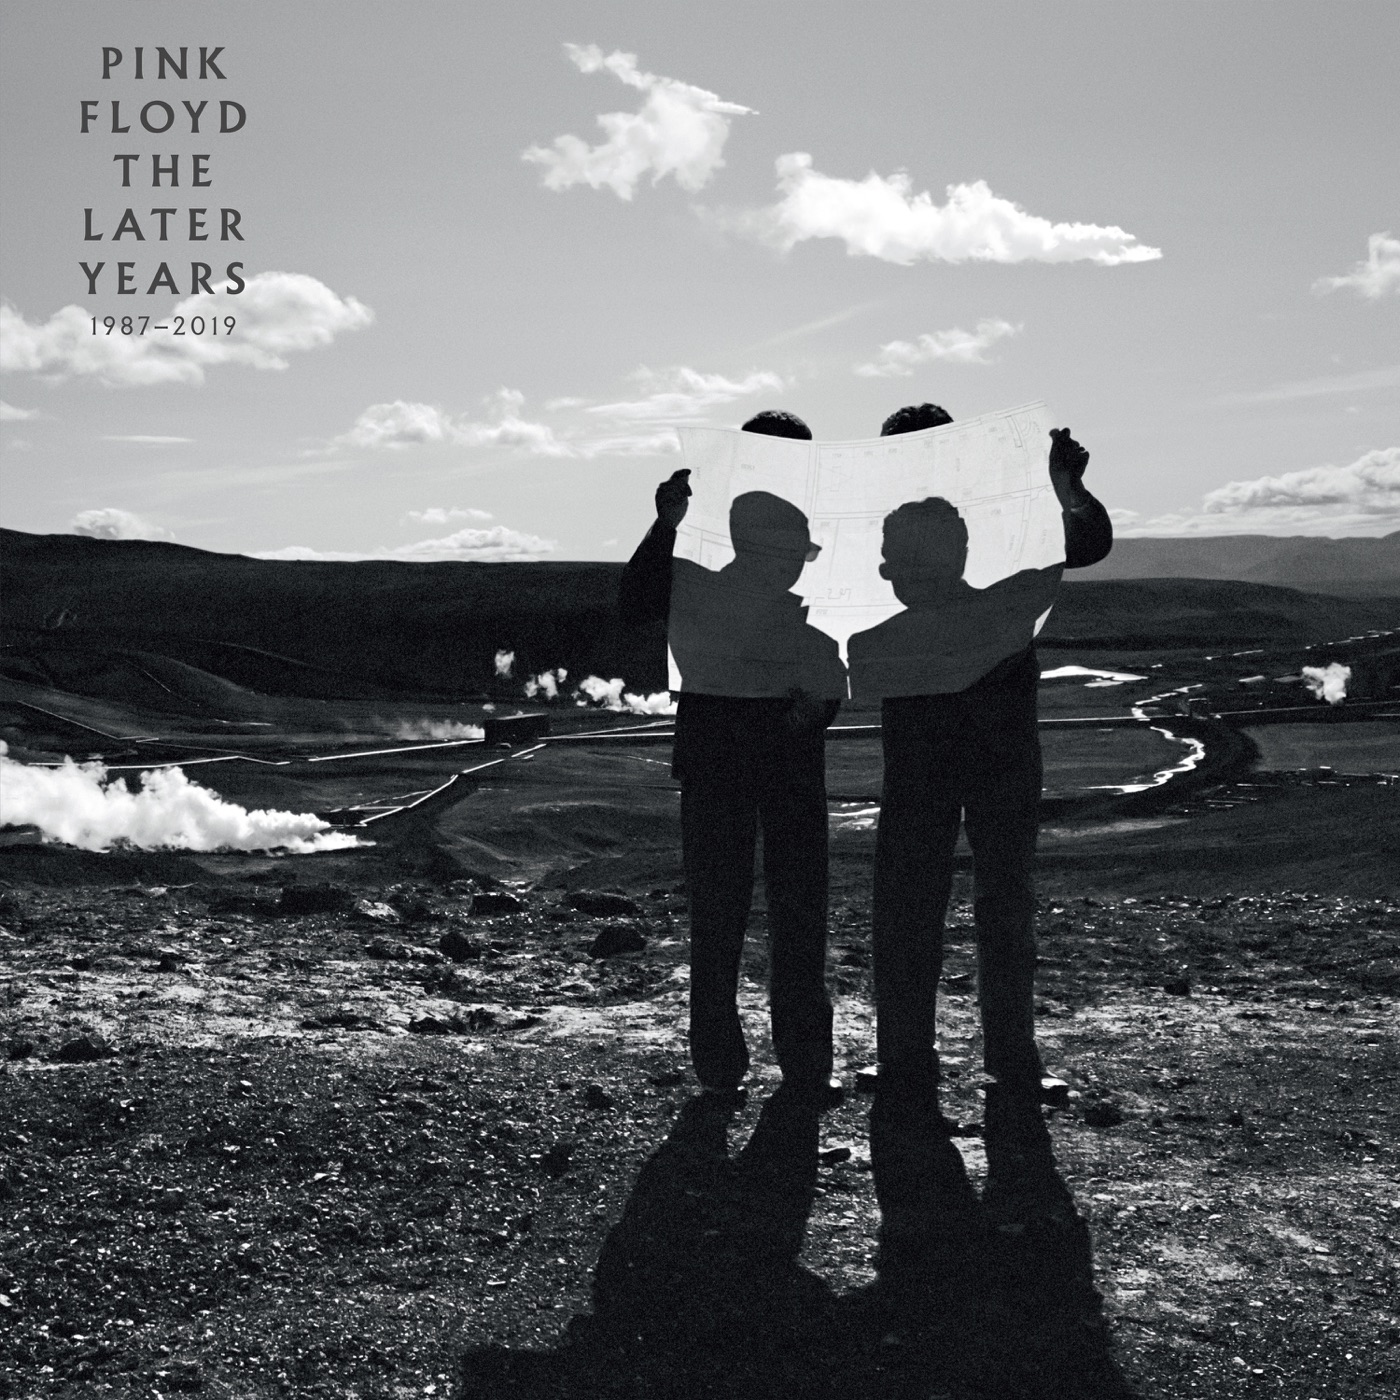 The Later Years 1987-2019 by Pink Floyd